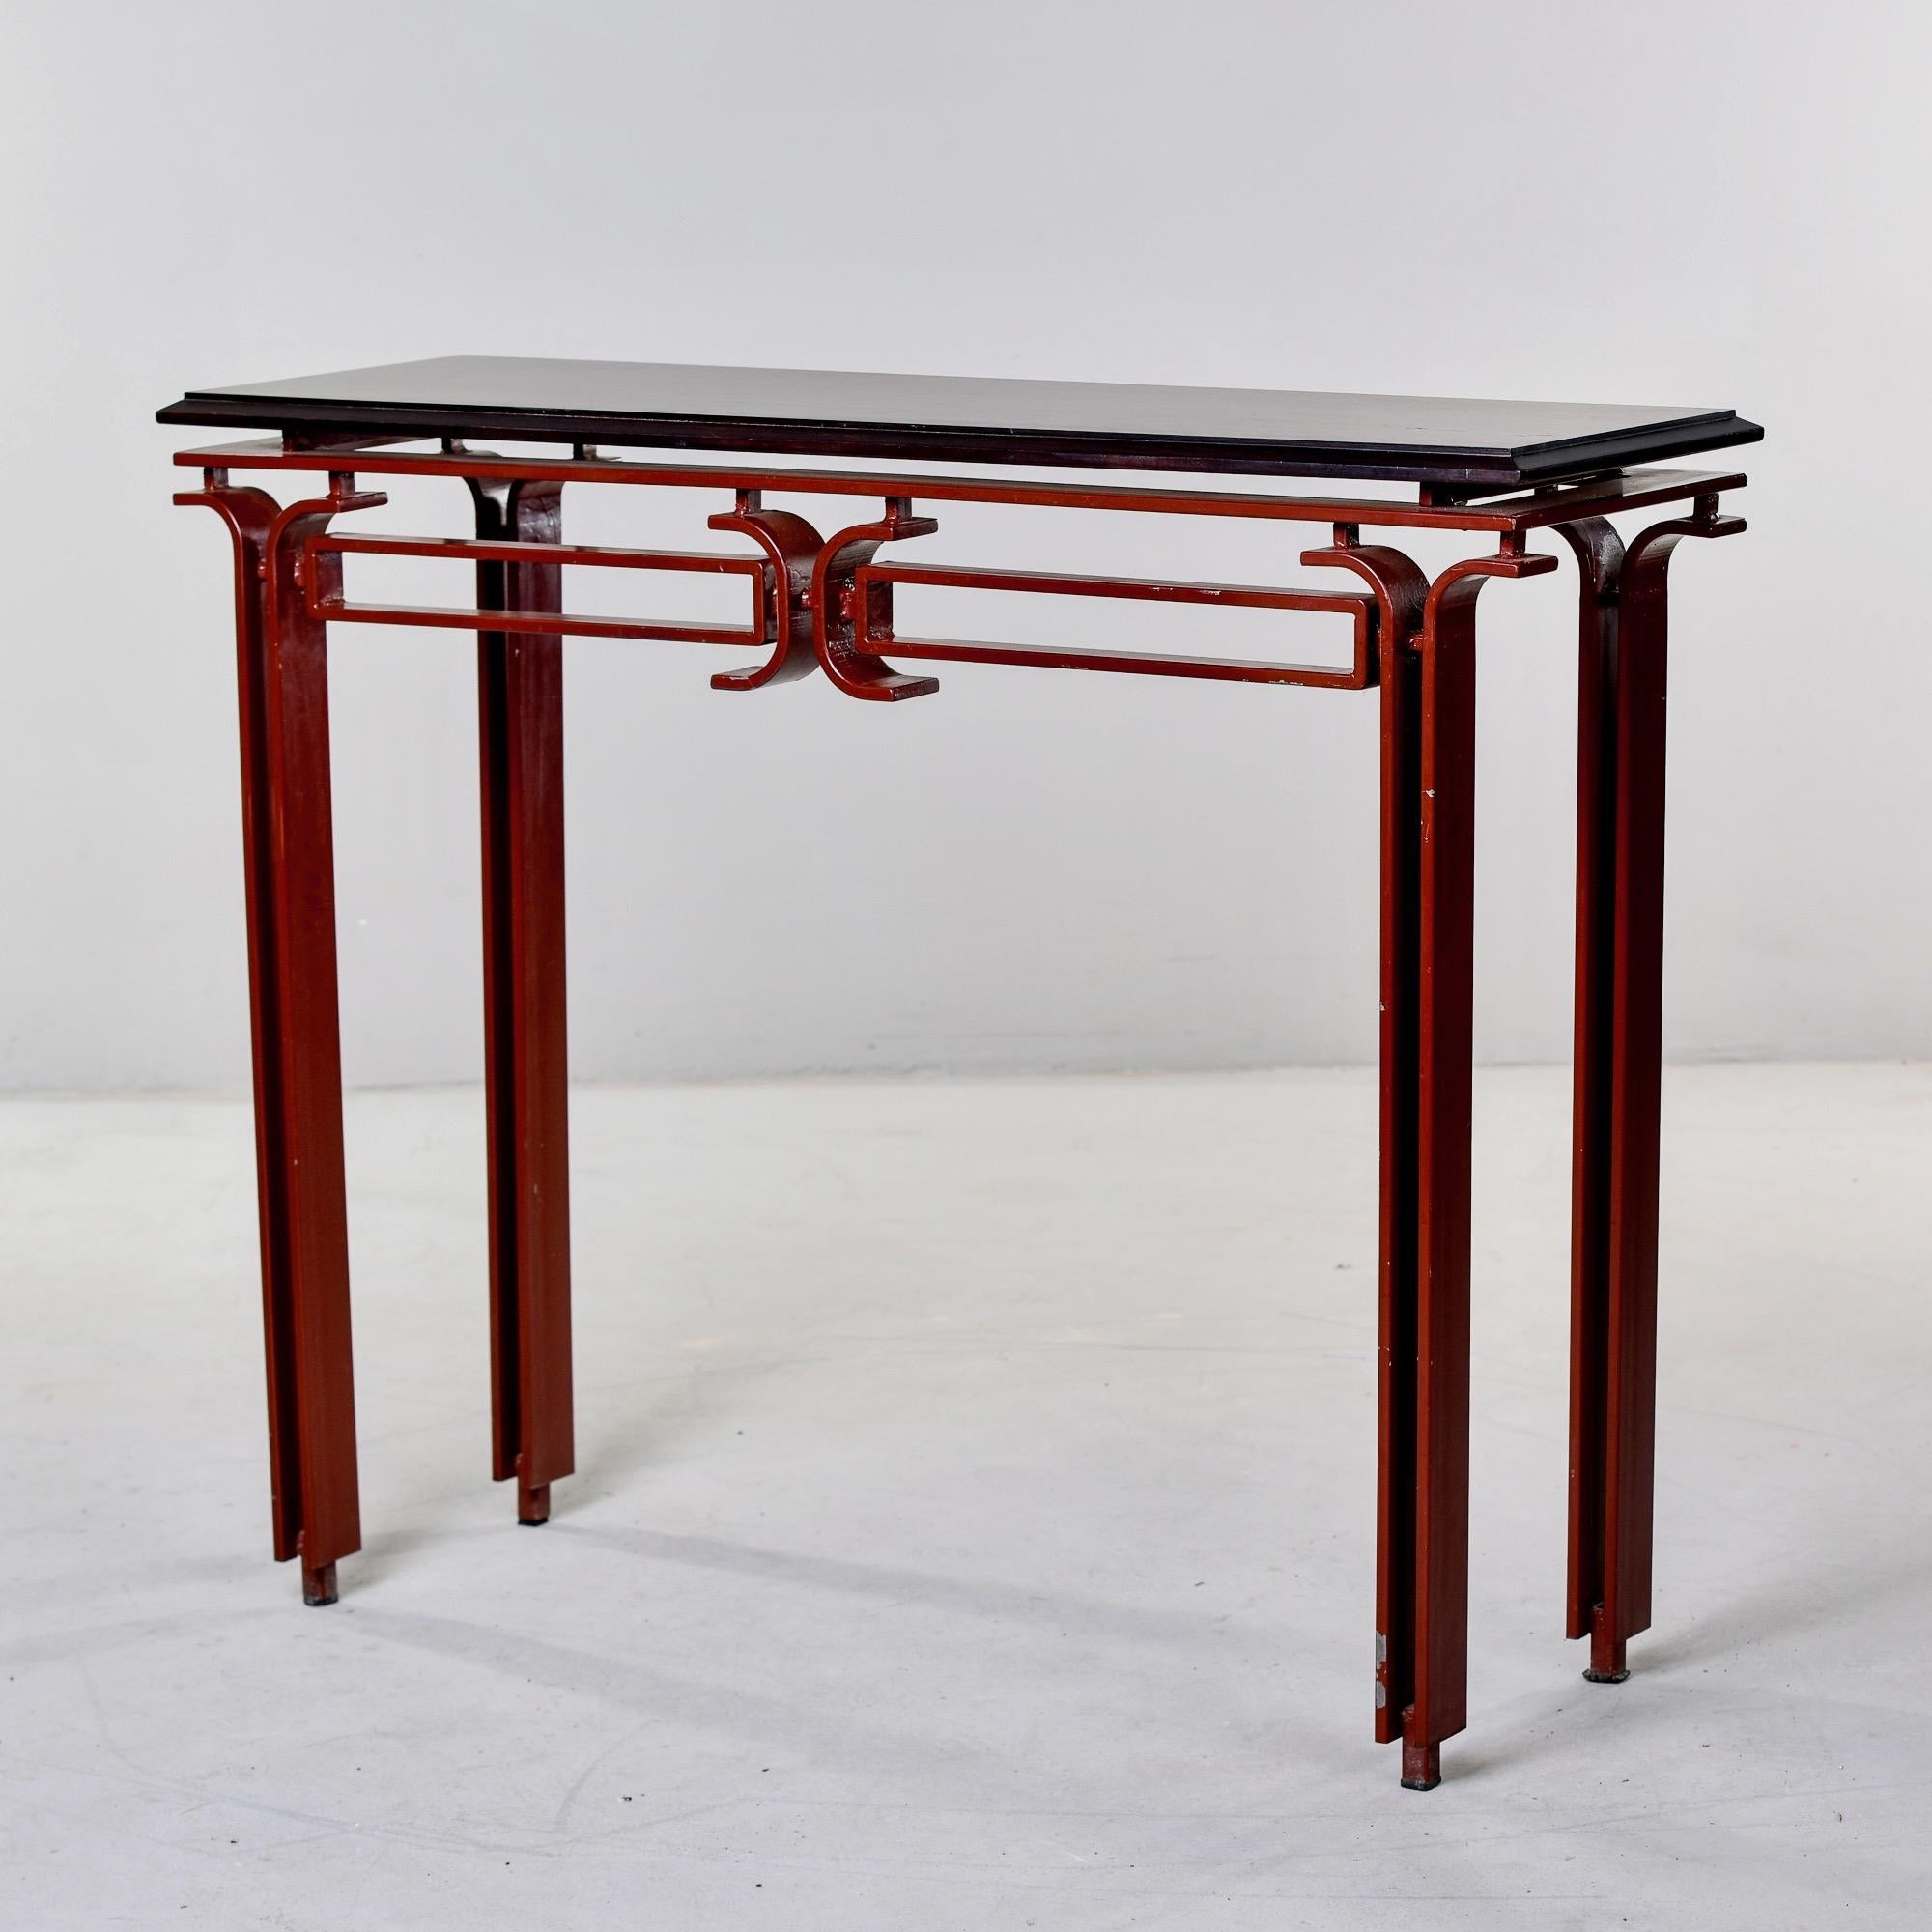 Found in Italy, this vintage circa 1980 console table has an unusual and sculptural metal base with an oxblood painted finish and veneered wood top. Veneer appears to be rosewood, but we cannot be certain. Unknown maker.